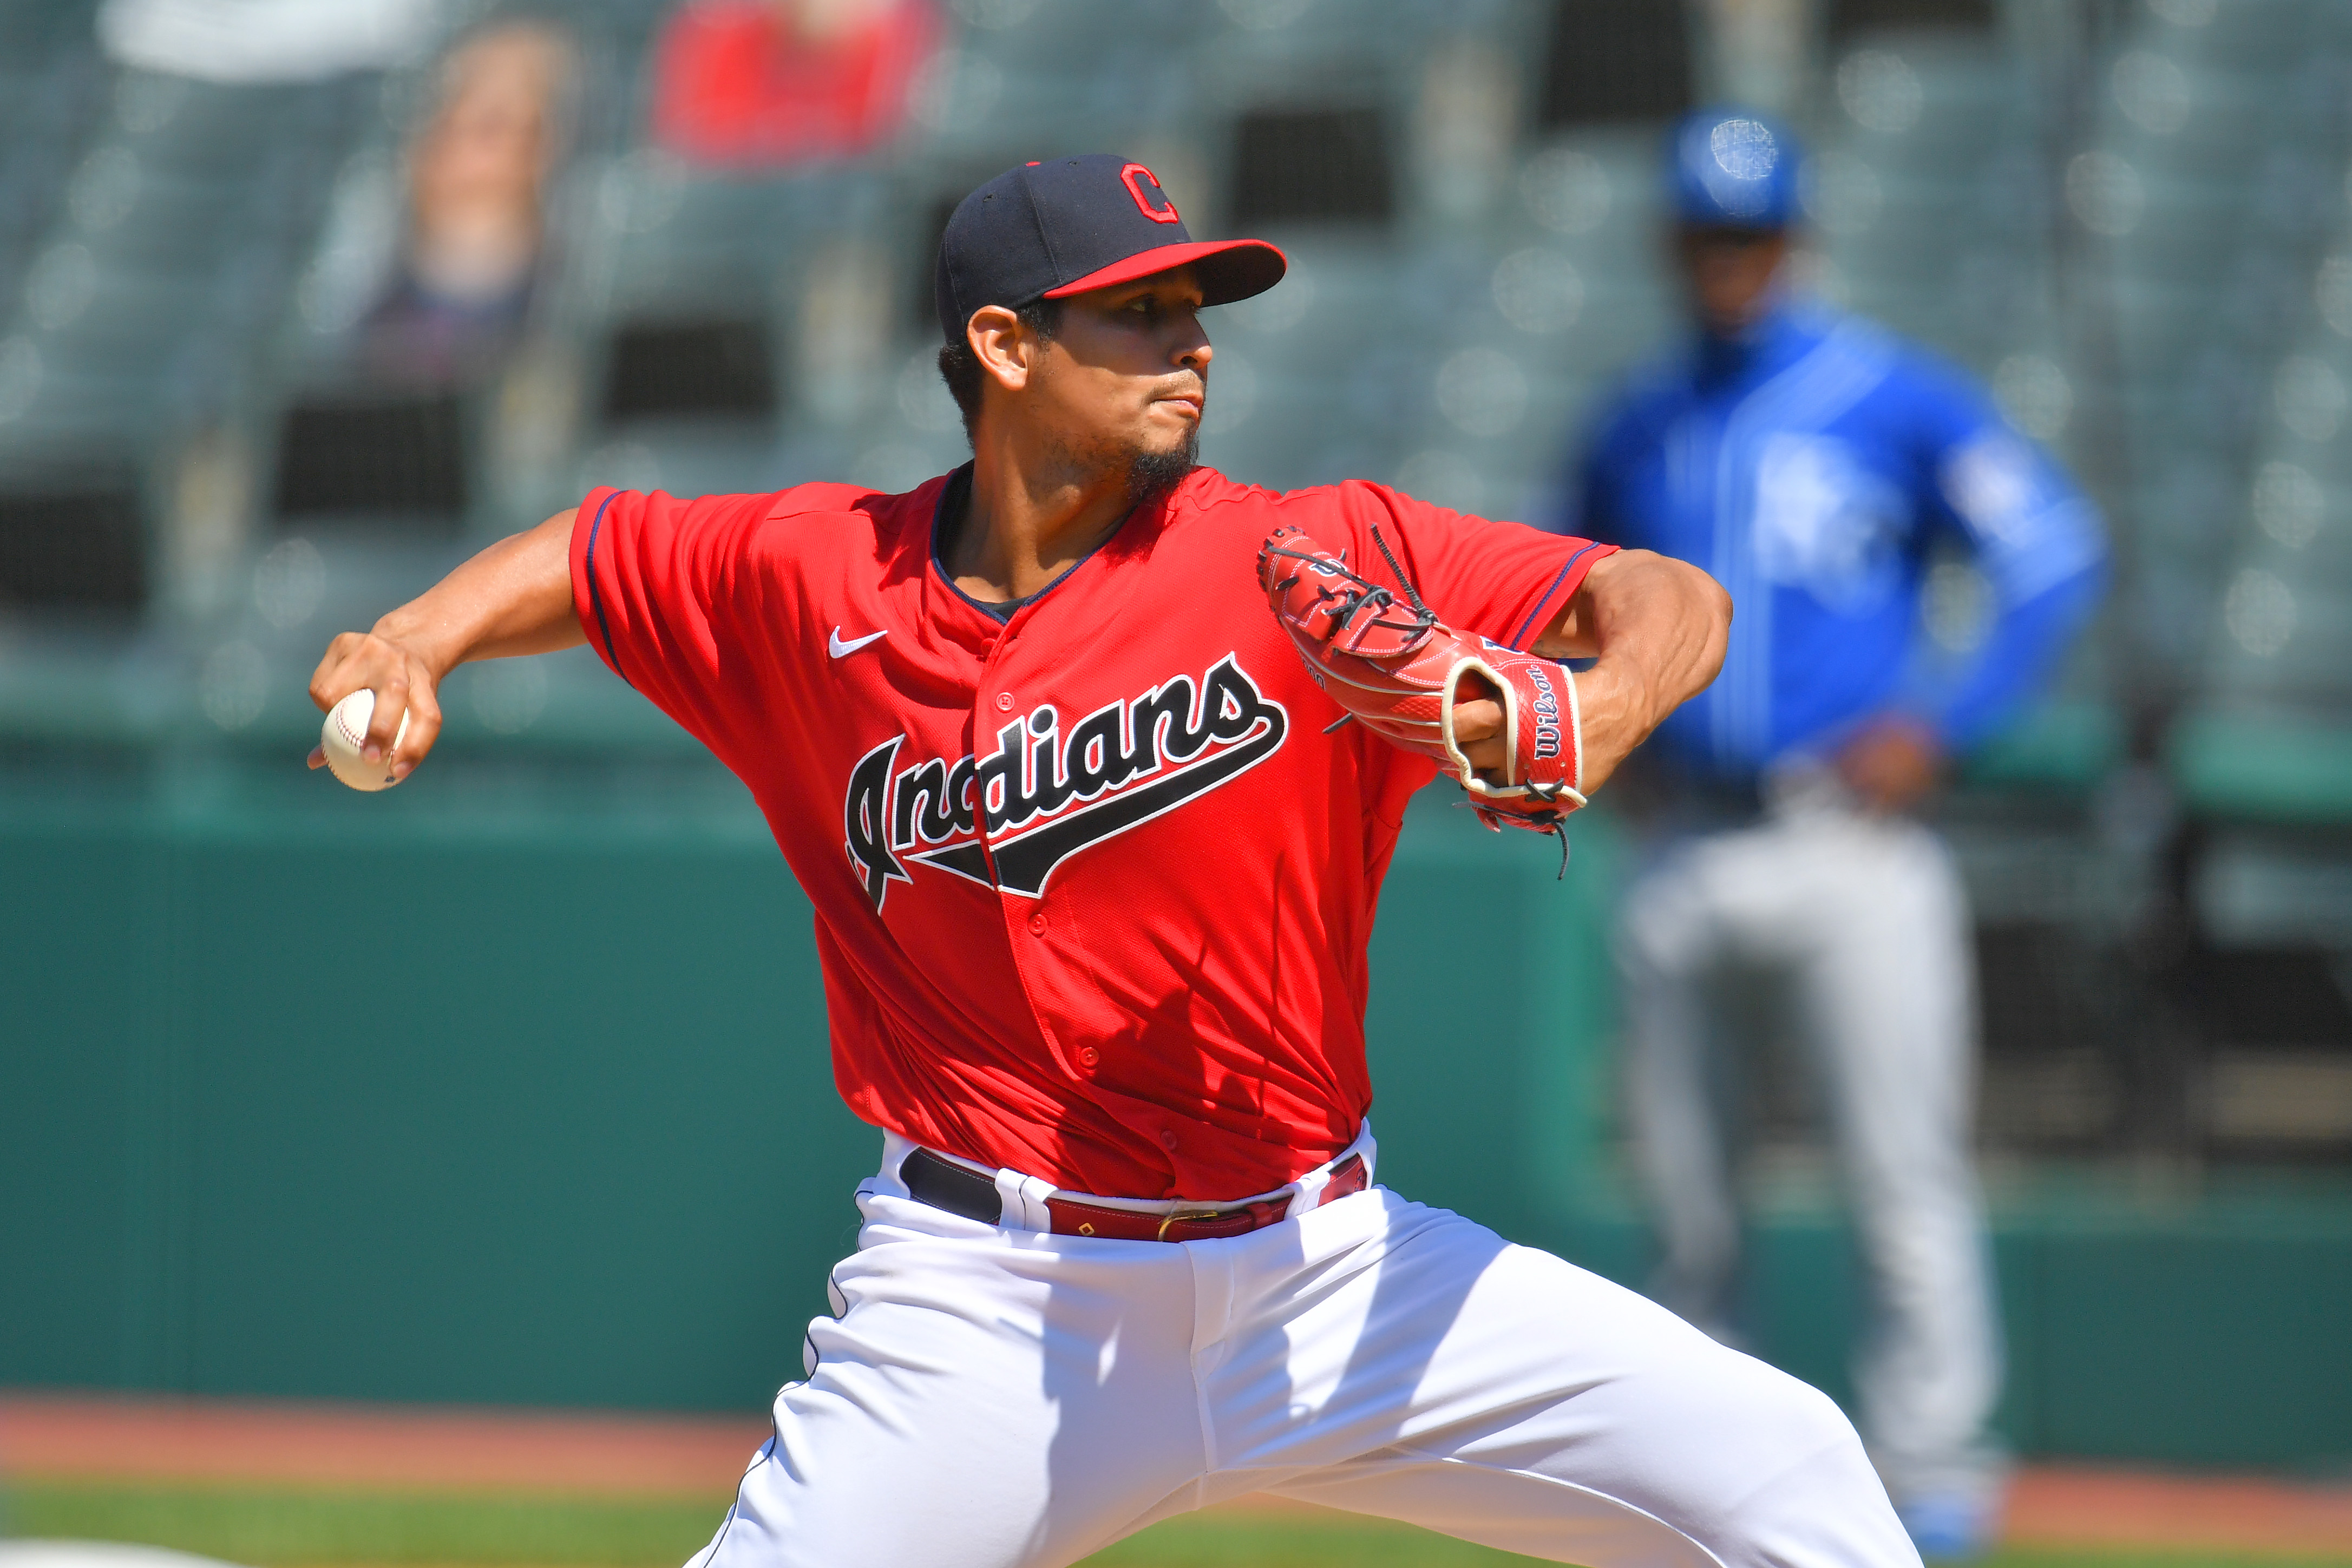 In a world with many problems, it also has selfless people like Carlos  Carrasco